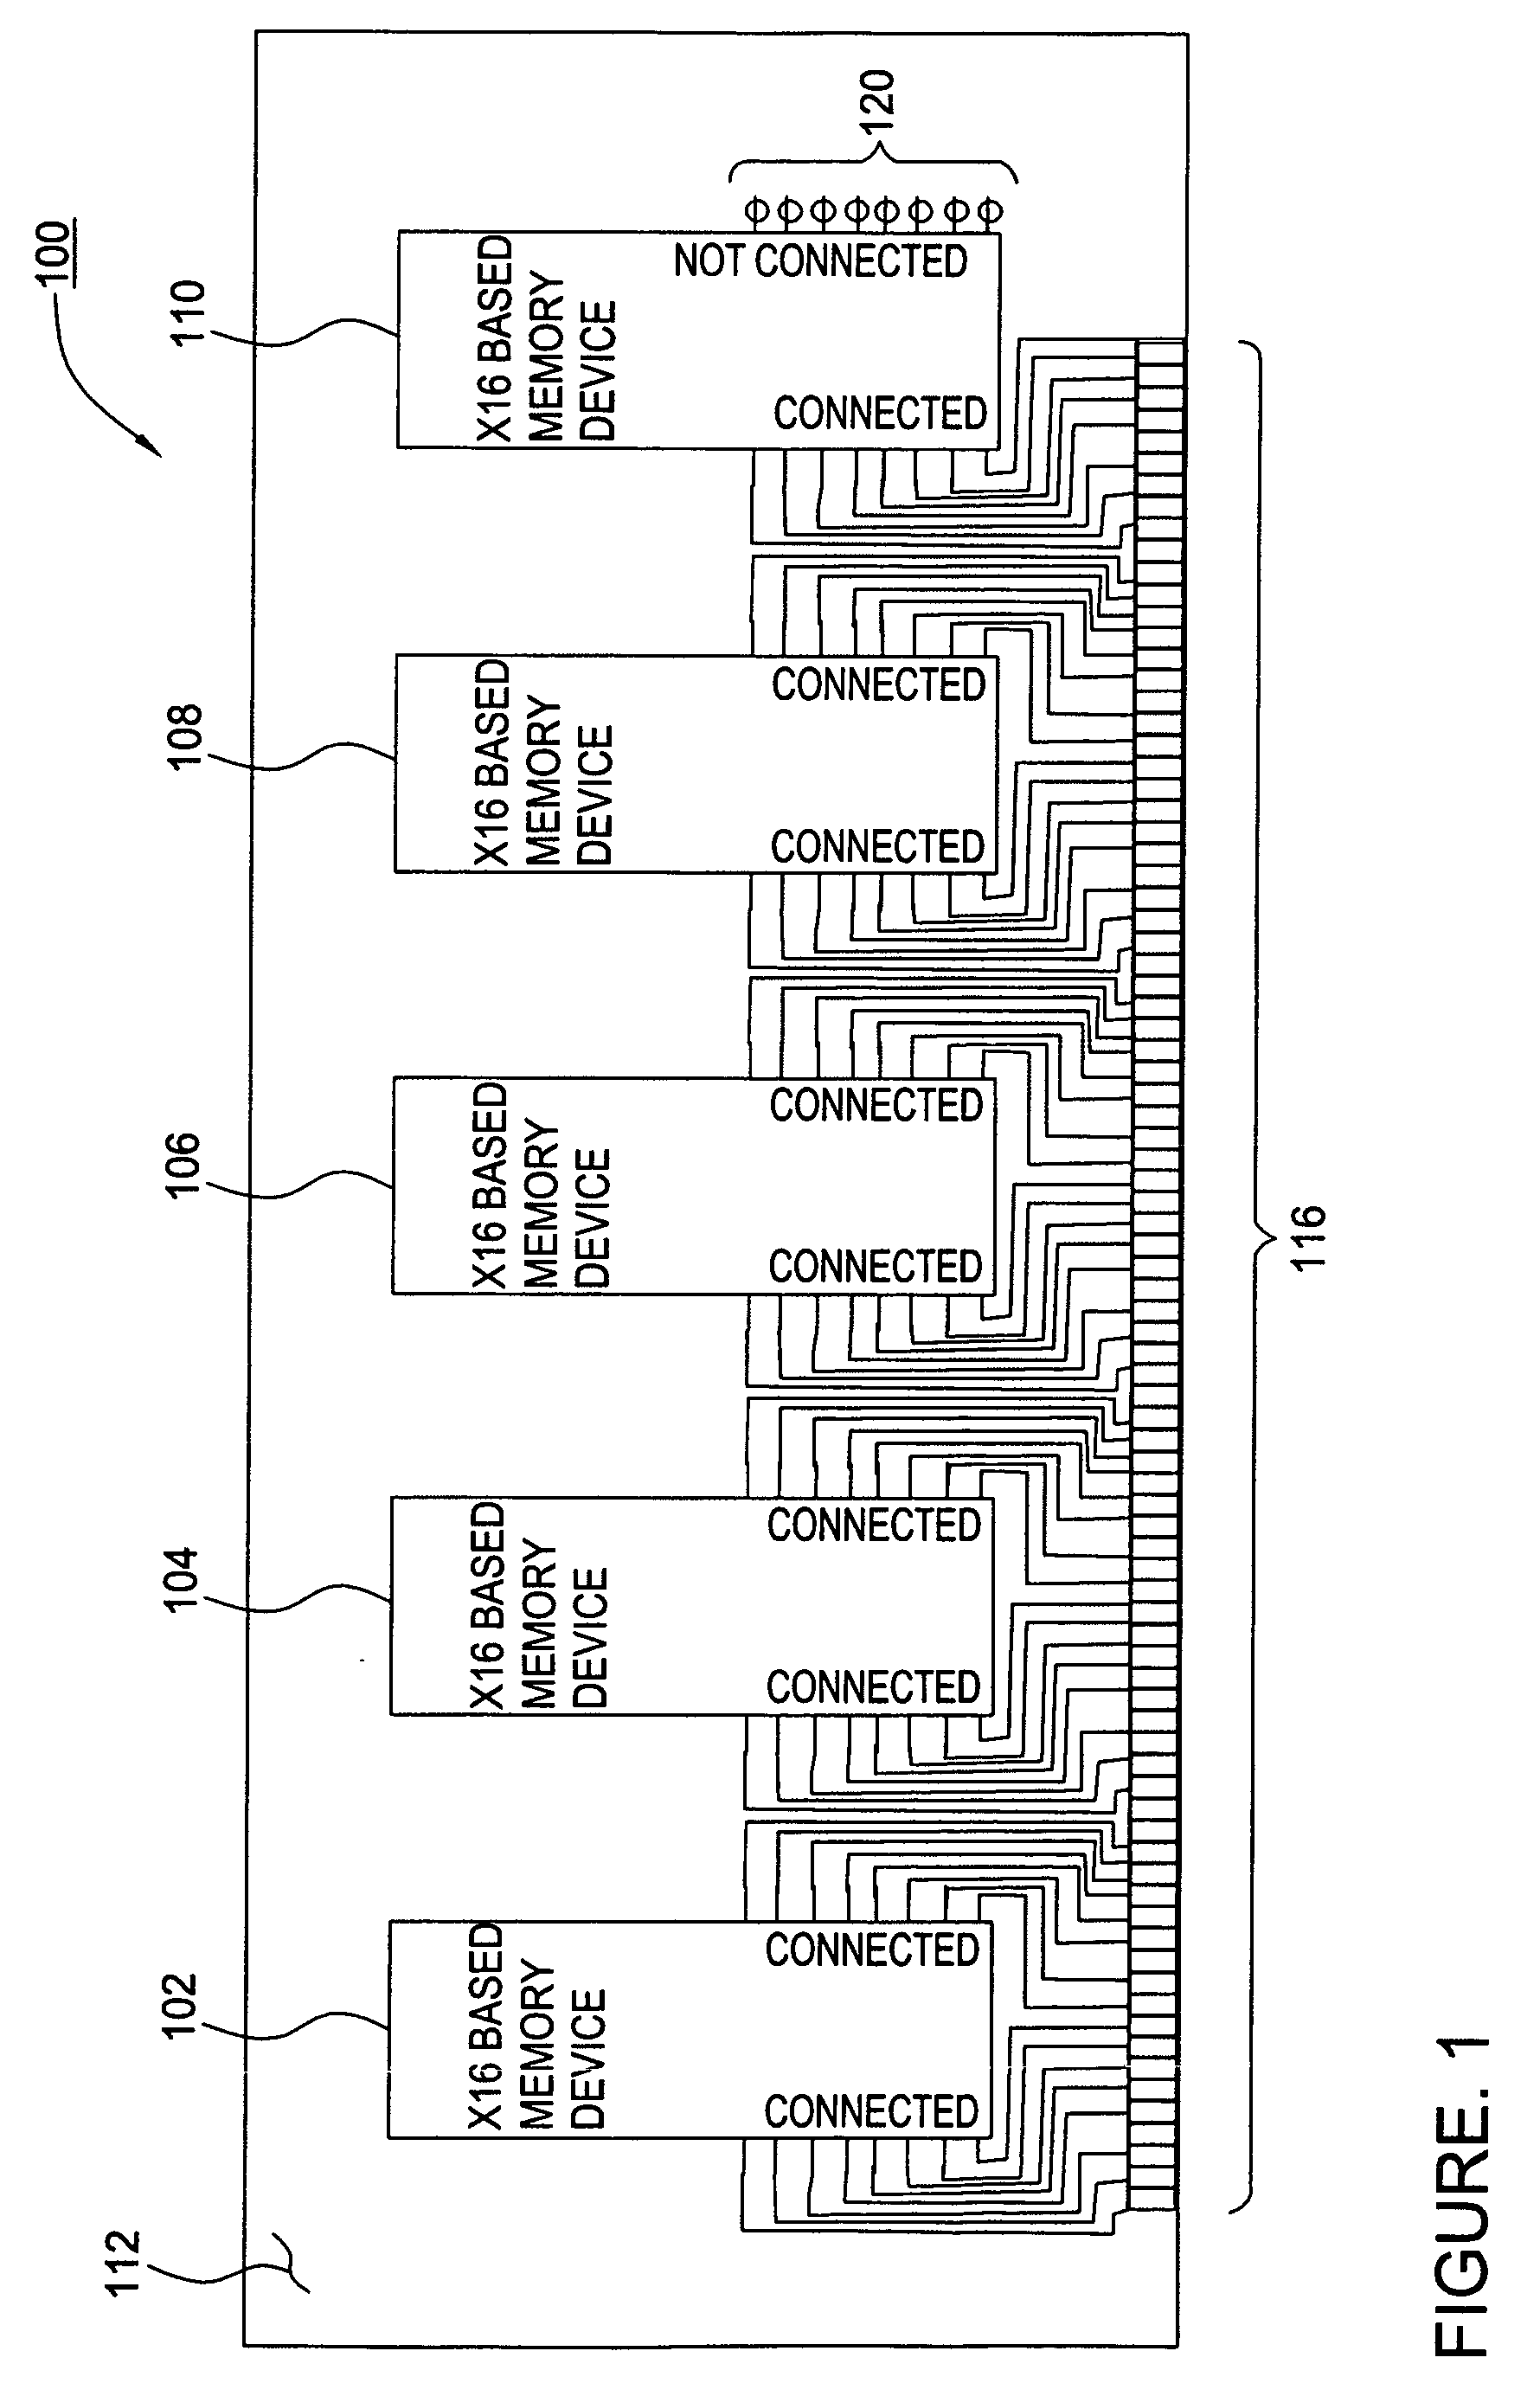 Device having spare I/O and method of using a device having spare I/O